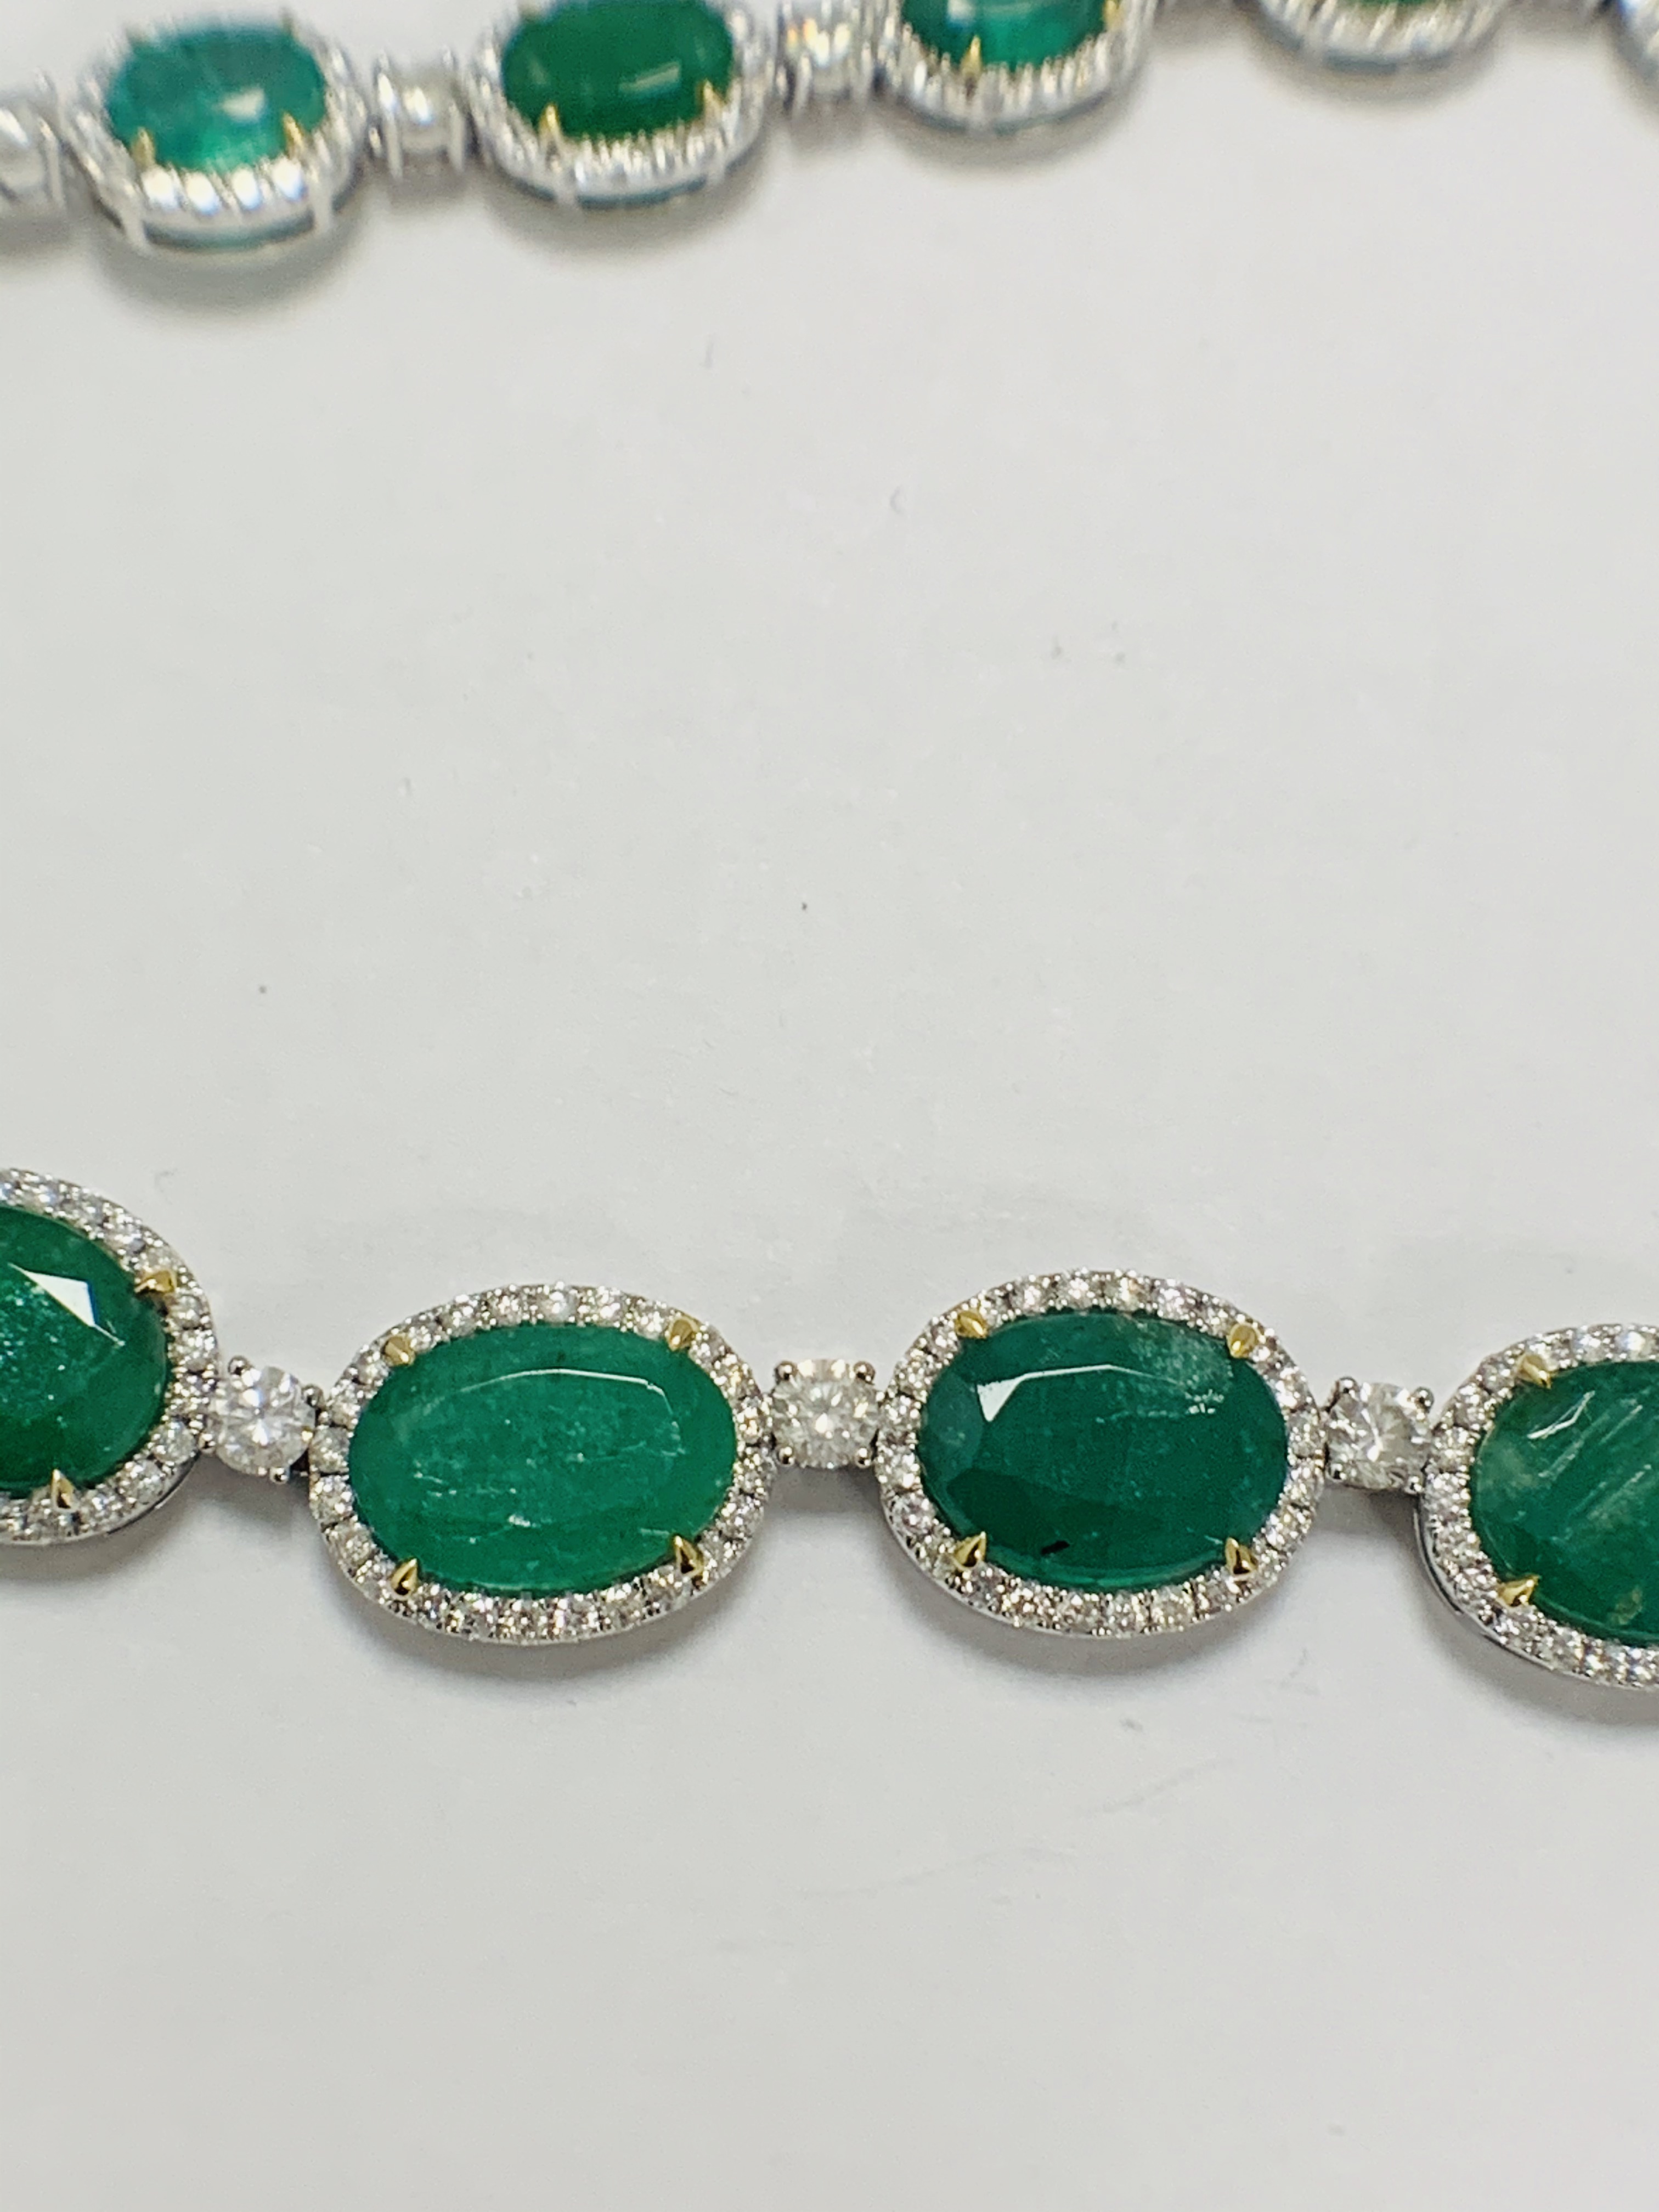 Platinum and Yellow Gold Emerald and Diamond necklace featuring, 29 oval cut, light to deep green Em - Image 9 of 36